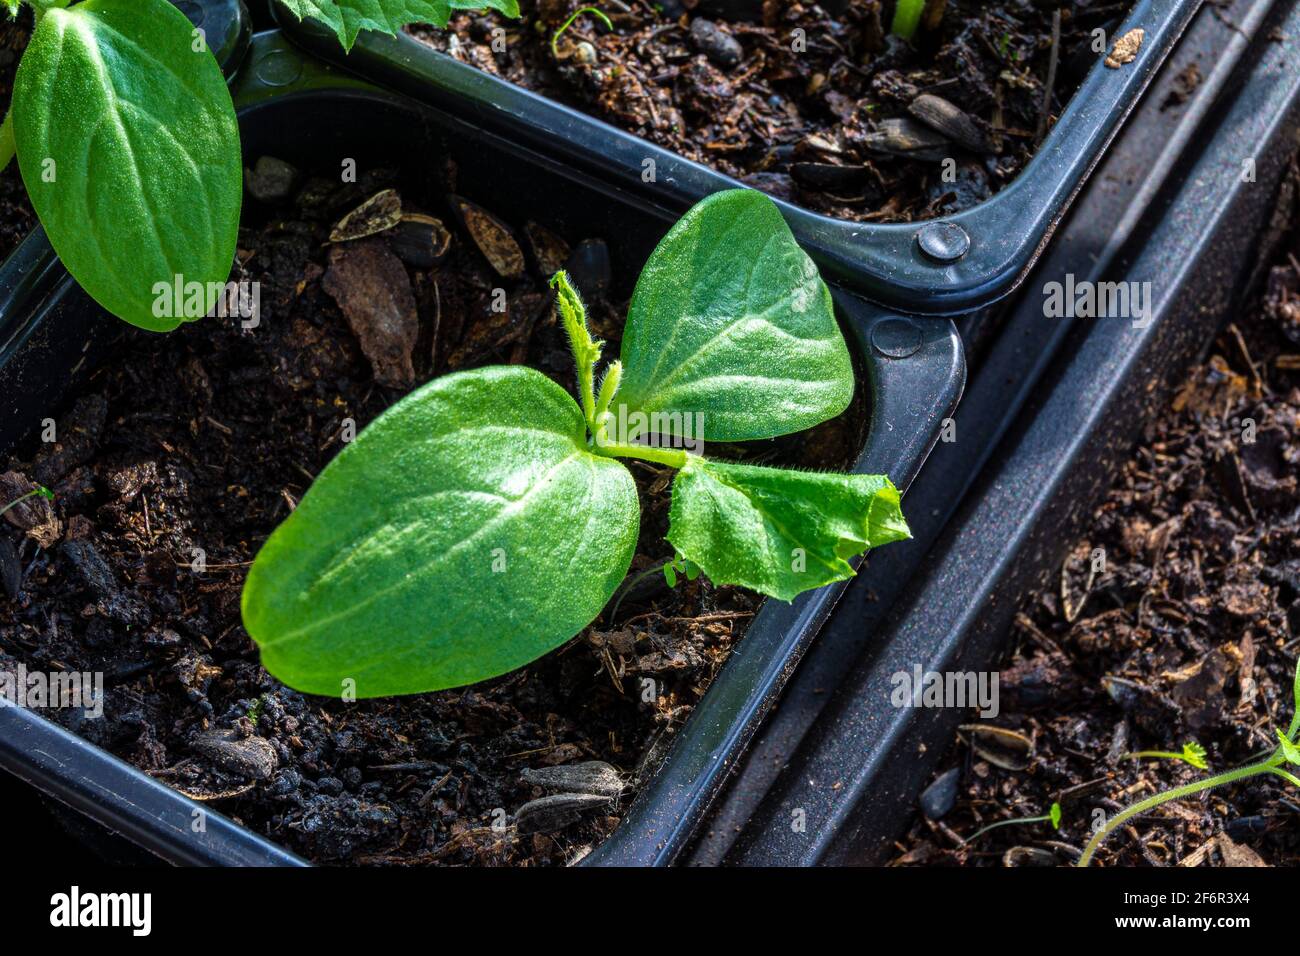 seedlings of cucumber in a pot of potting soil, unfavorable conditions led to the wilting of these leaves. Seedling leaves dry up. Stock Photo